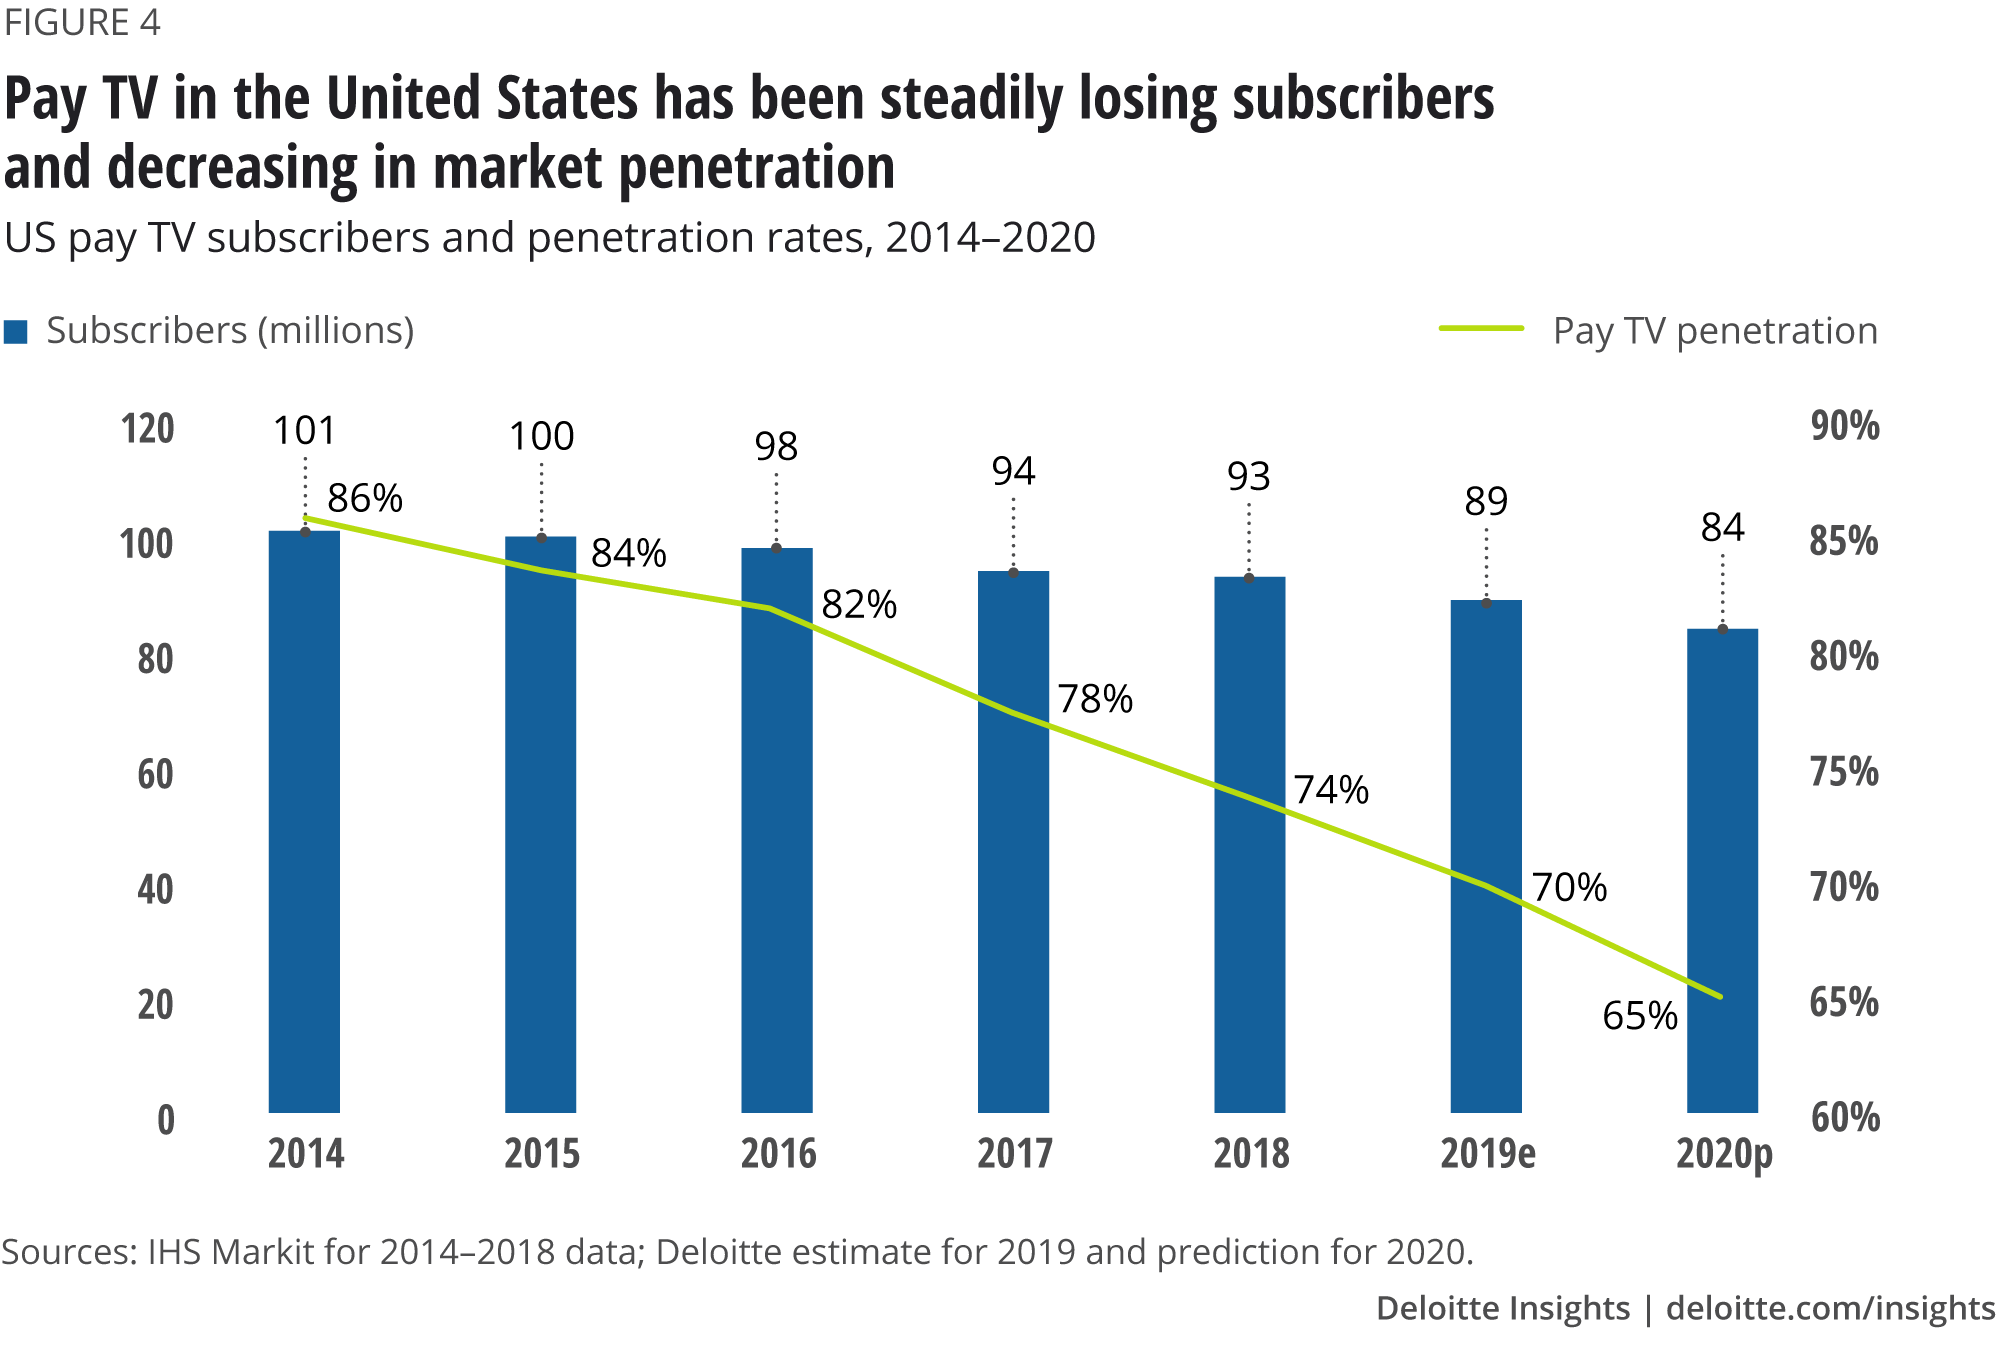 Pay TV in the United States has been steadily losing subscribers and decreasing in market penetration